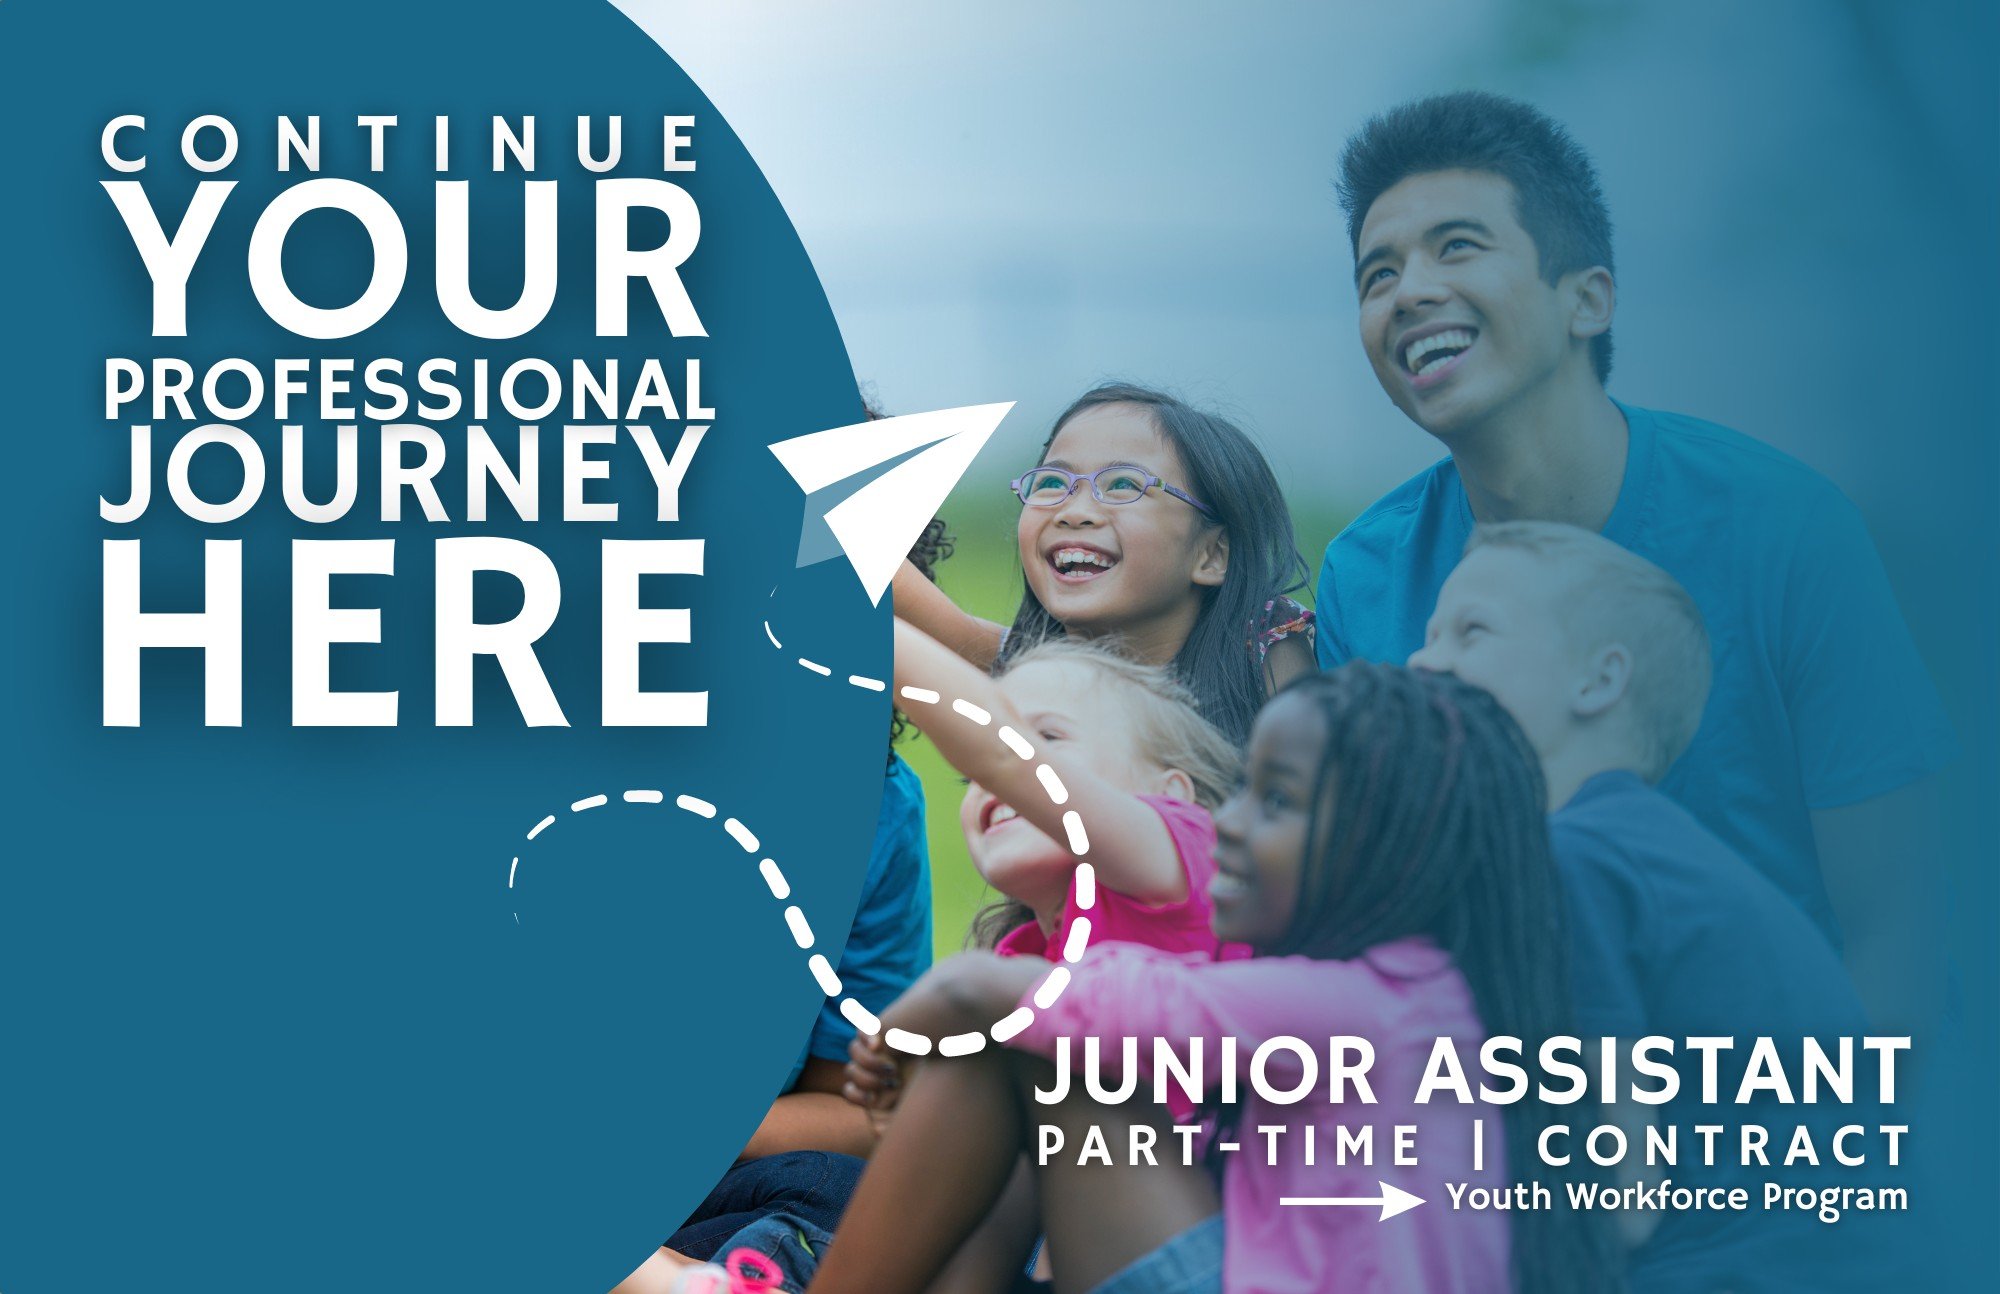 📌Now hiring -&gt;Junior Assistants&lt;- in the River Arts Summer Youth Workforce Program.
.
.
This is a contract role that provides opportunity for the youth of Lamoille County entering the workforce. This part-time summer role supports River Arts w